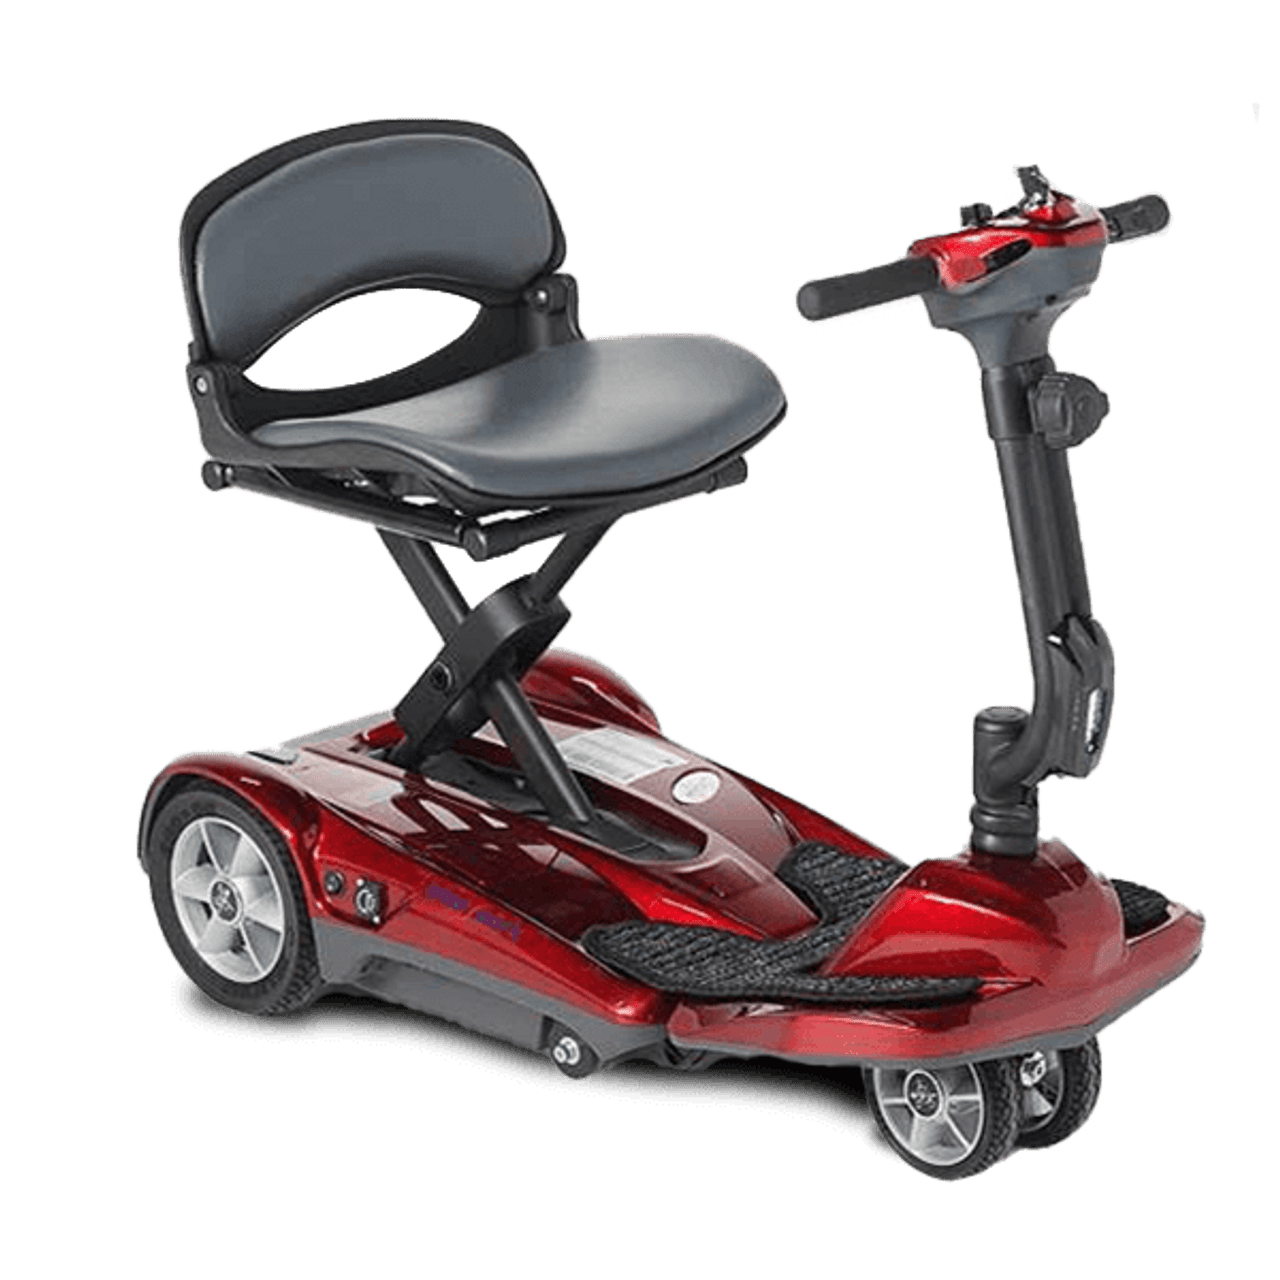 EV Rider Automatic Fold-Up Transport AF+ Deluxe Folding Electric Scooter-Chicken Pieces